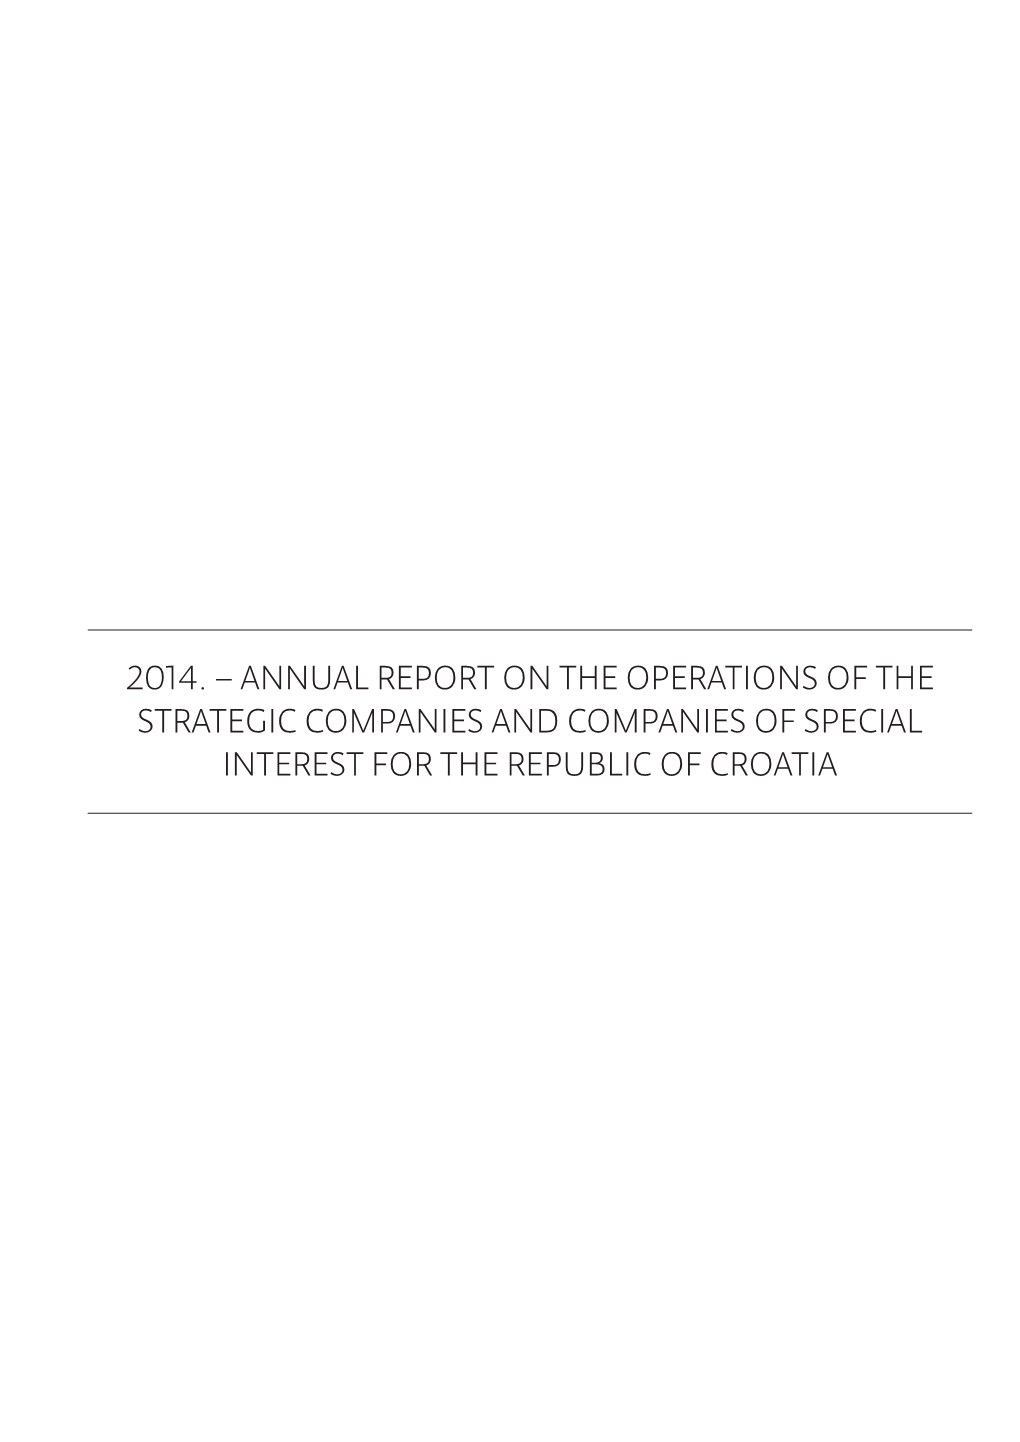 Annual Report on the Operation of the Strategic Companies And